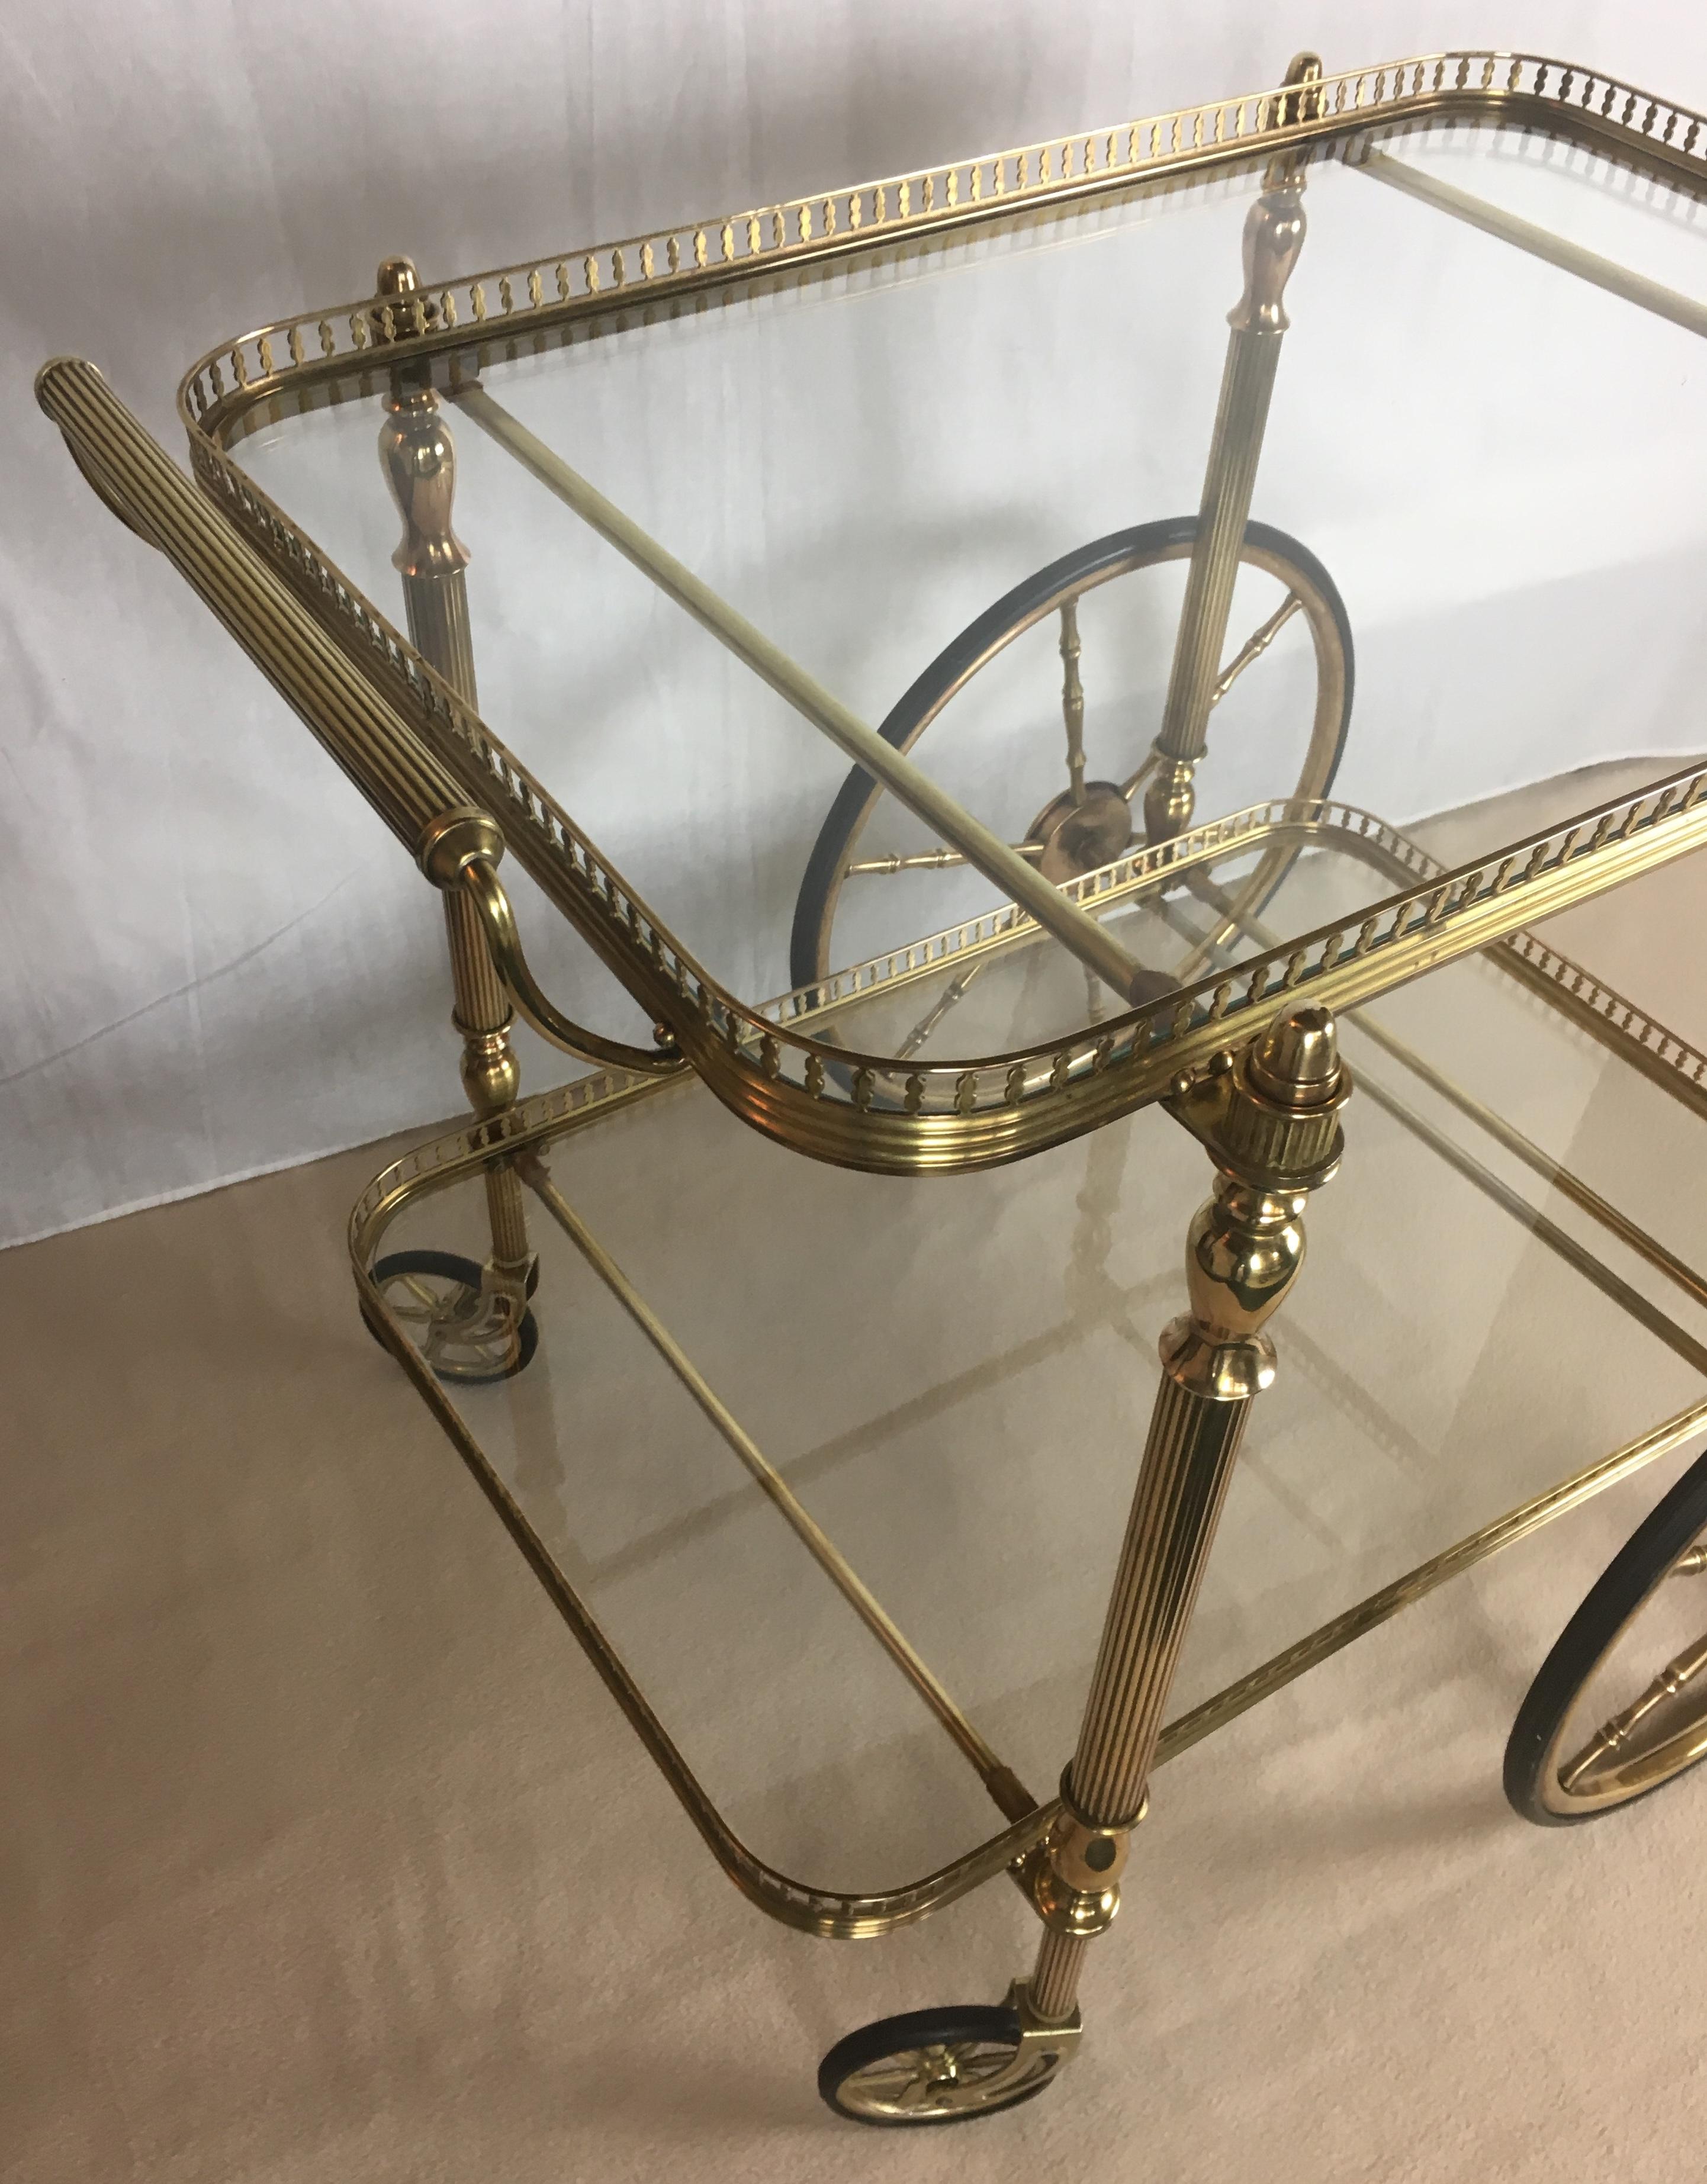 A gorgeous Neoclassical brass trolley or bar cart with two glass shelves, French, circa 1940. In the style of Maison Jansen.

Perfect in any living room, kitchen, study, office, even a bedroom.
 
Ships dismantled, easy to reassemble. If preferred,